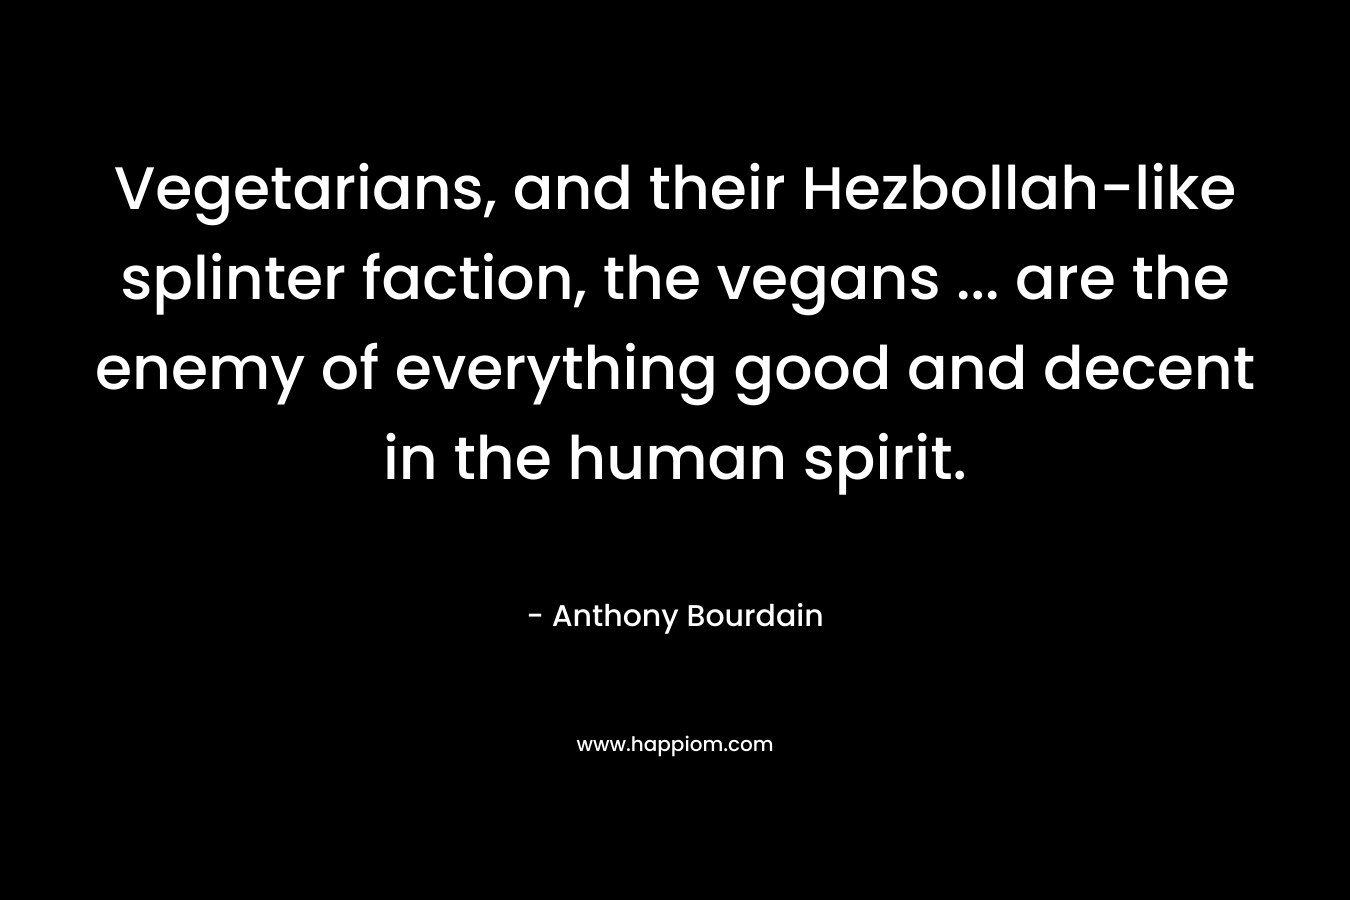 Vegetarians, and their Hezbollah-like splinter faction, the vegans … are the enemy of everything good and decent in the human spirit. – Anthony Bourdain